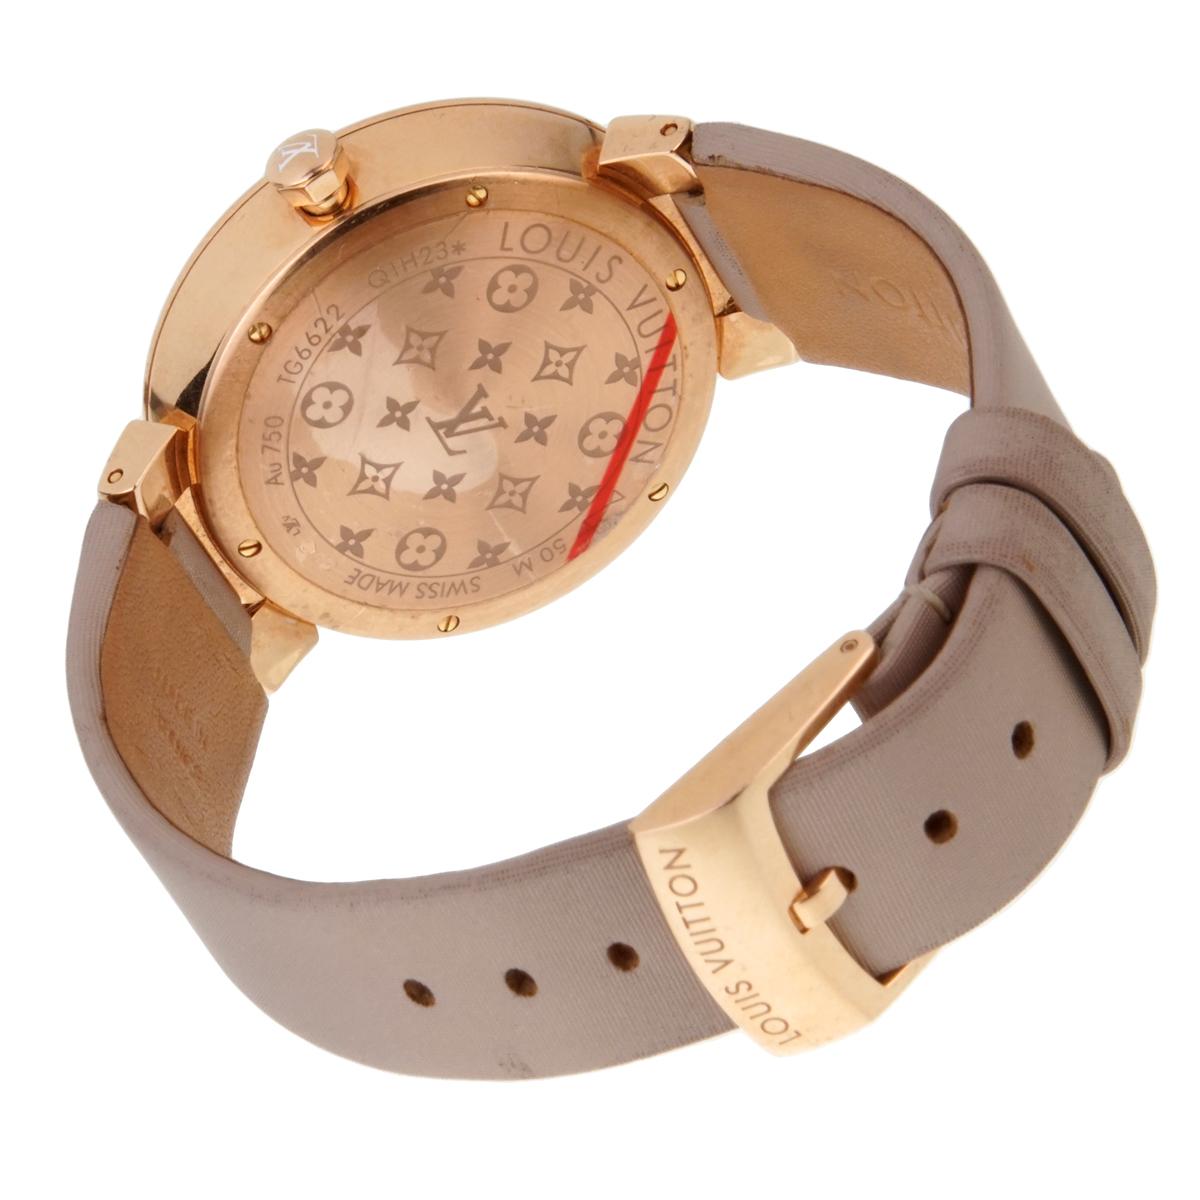 SOLD OUT! A classic Louis Vuitton Tambour Slim rose gold case set with 60 diamonds, the sculpted mother of pearl monogram flower is set with an additional 58 round brilliant cut diamonds. The bracelet is interchangeable and features the Ardillon